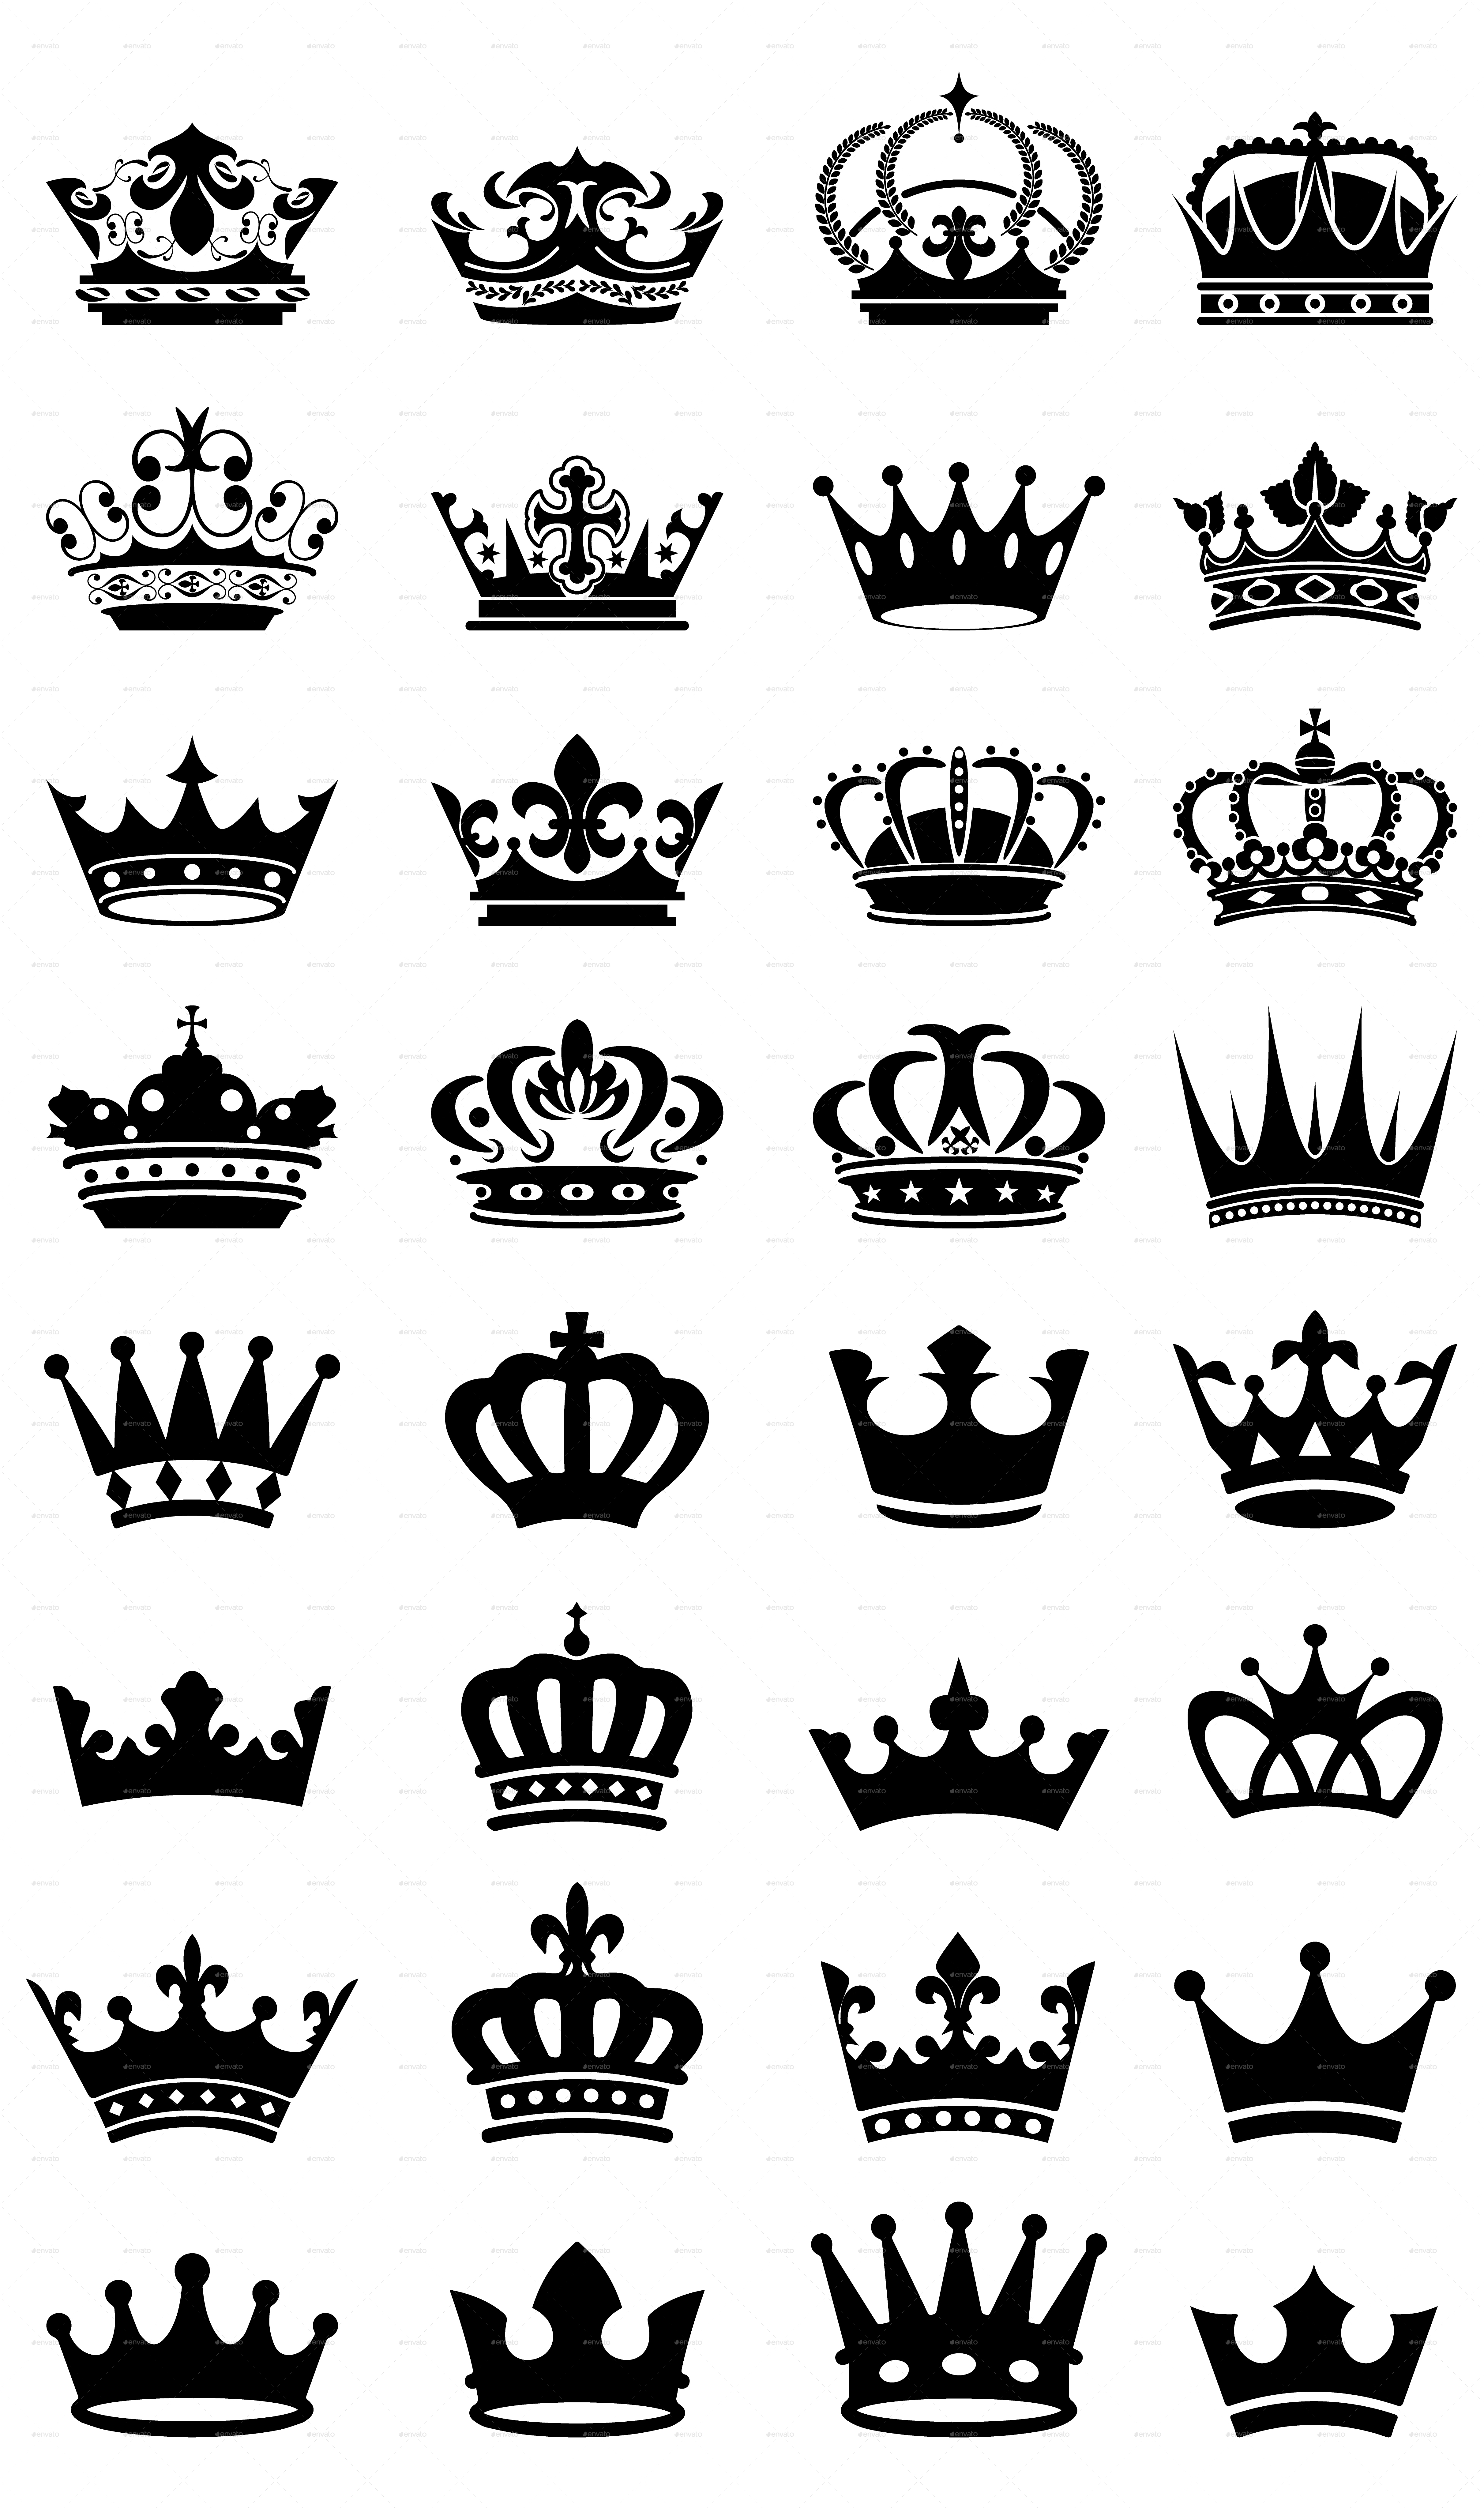 32 Royal Black Crowns by Moon_Designs | GraphicRiver